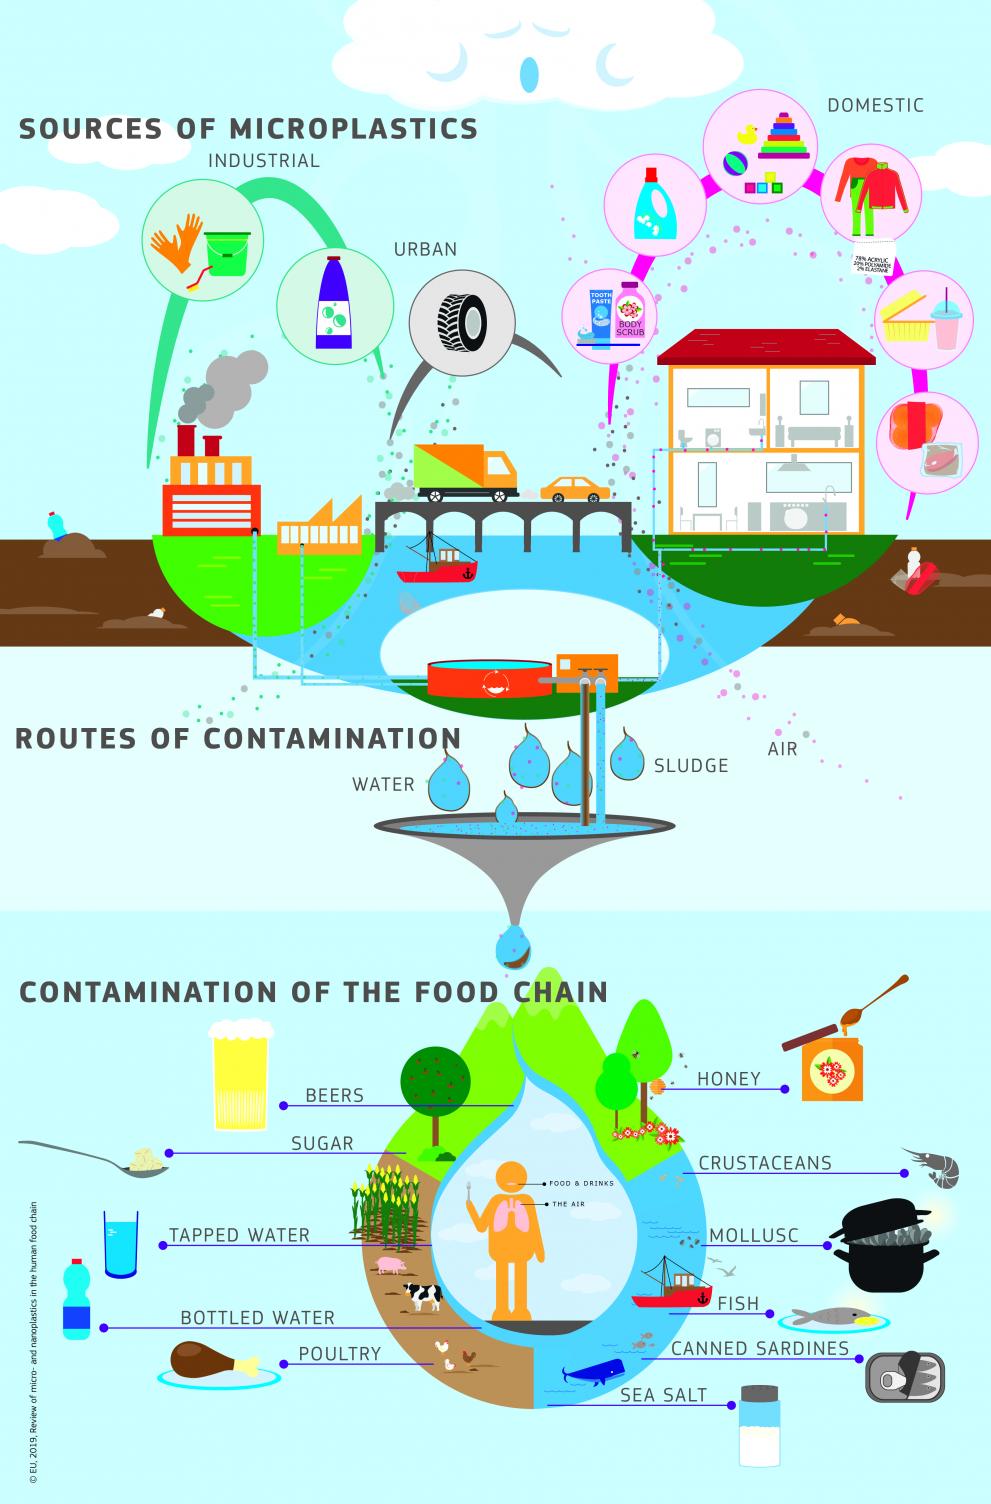 The routes of microplastic particles to humans